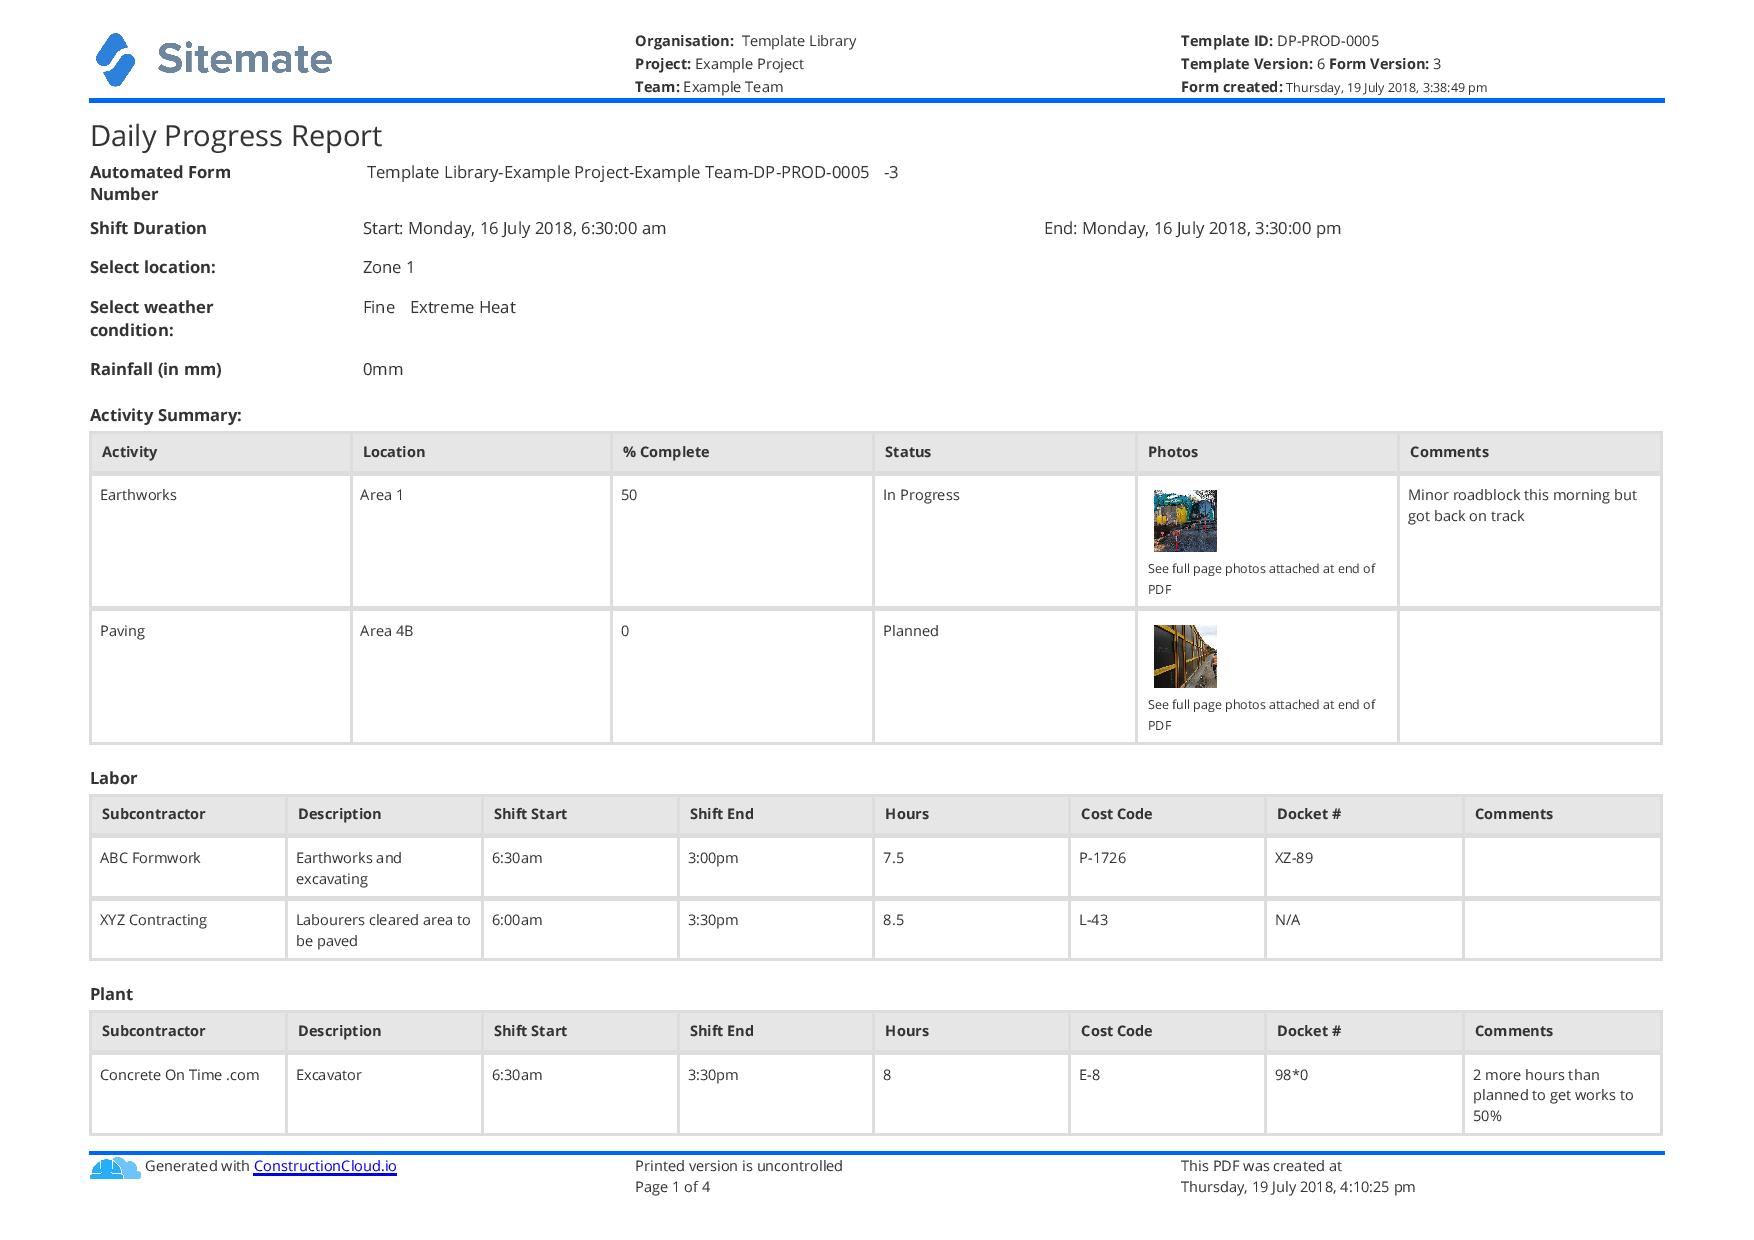 Construction Site Daily Progress Report template: Use it free